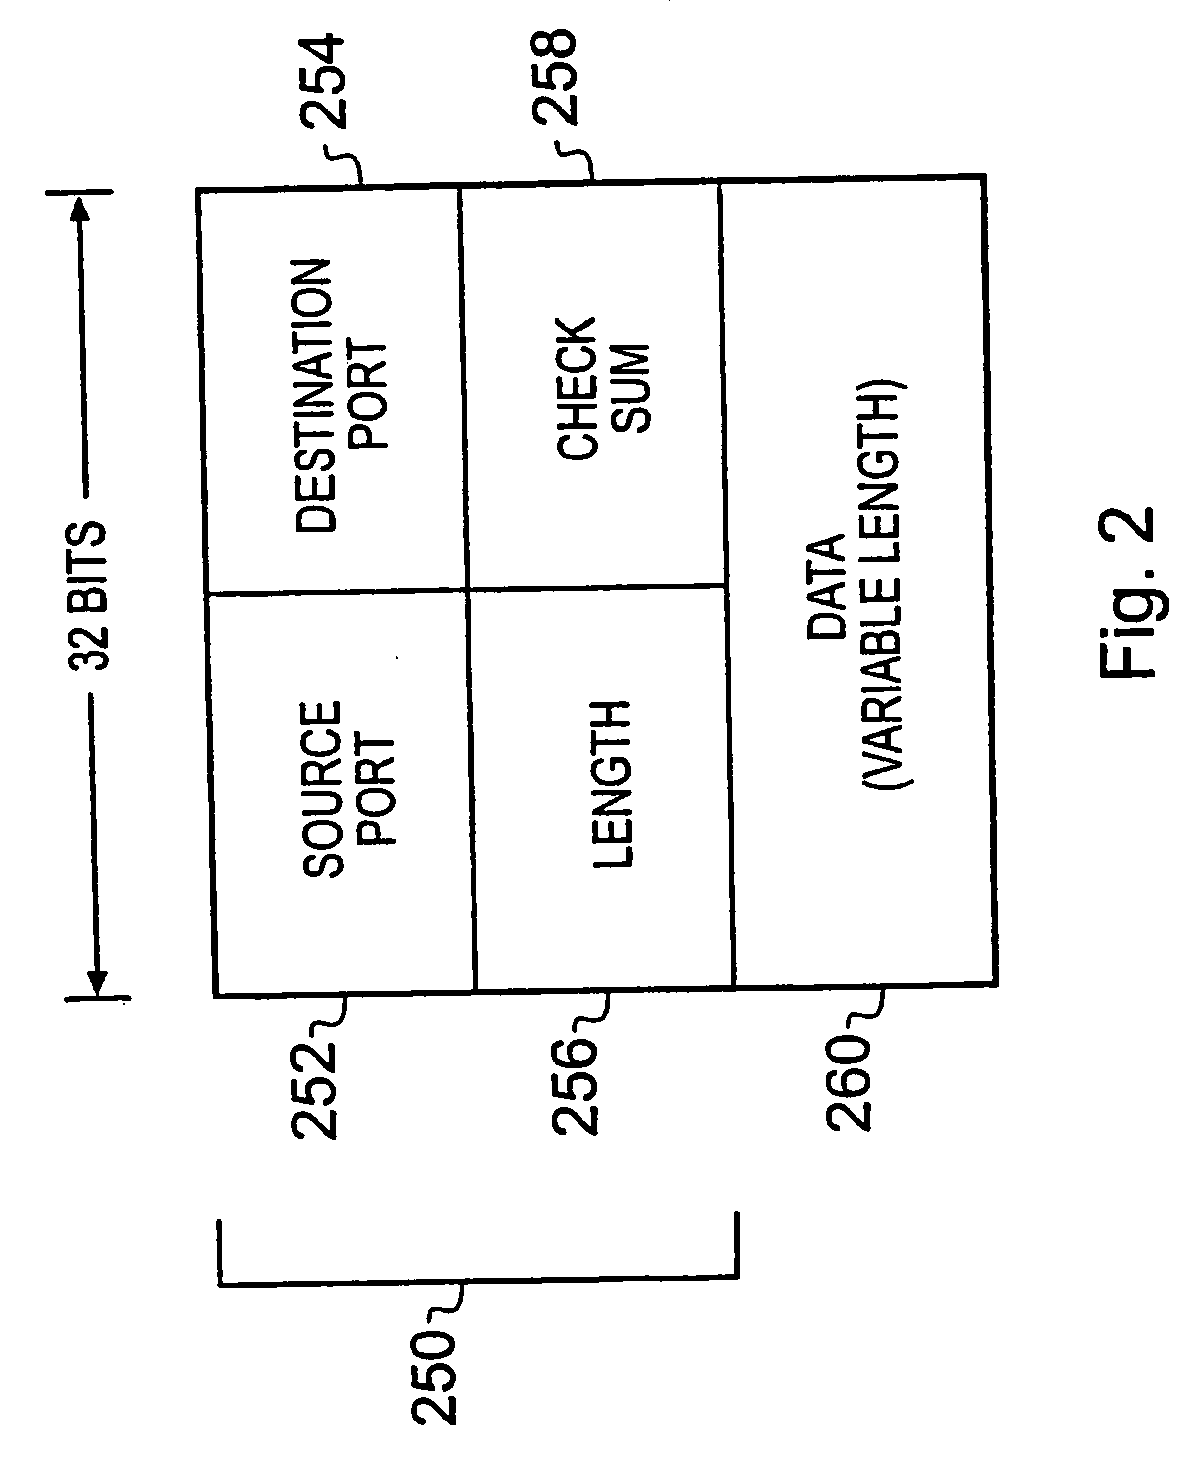 Radio telecommunications apparatus and method for communcations internet data packets containing different types of data